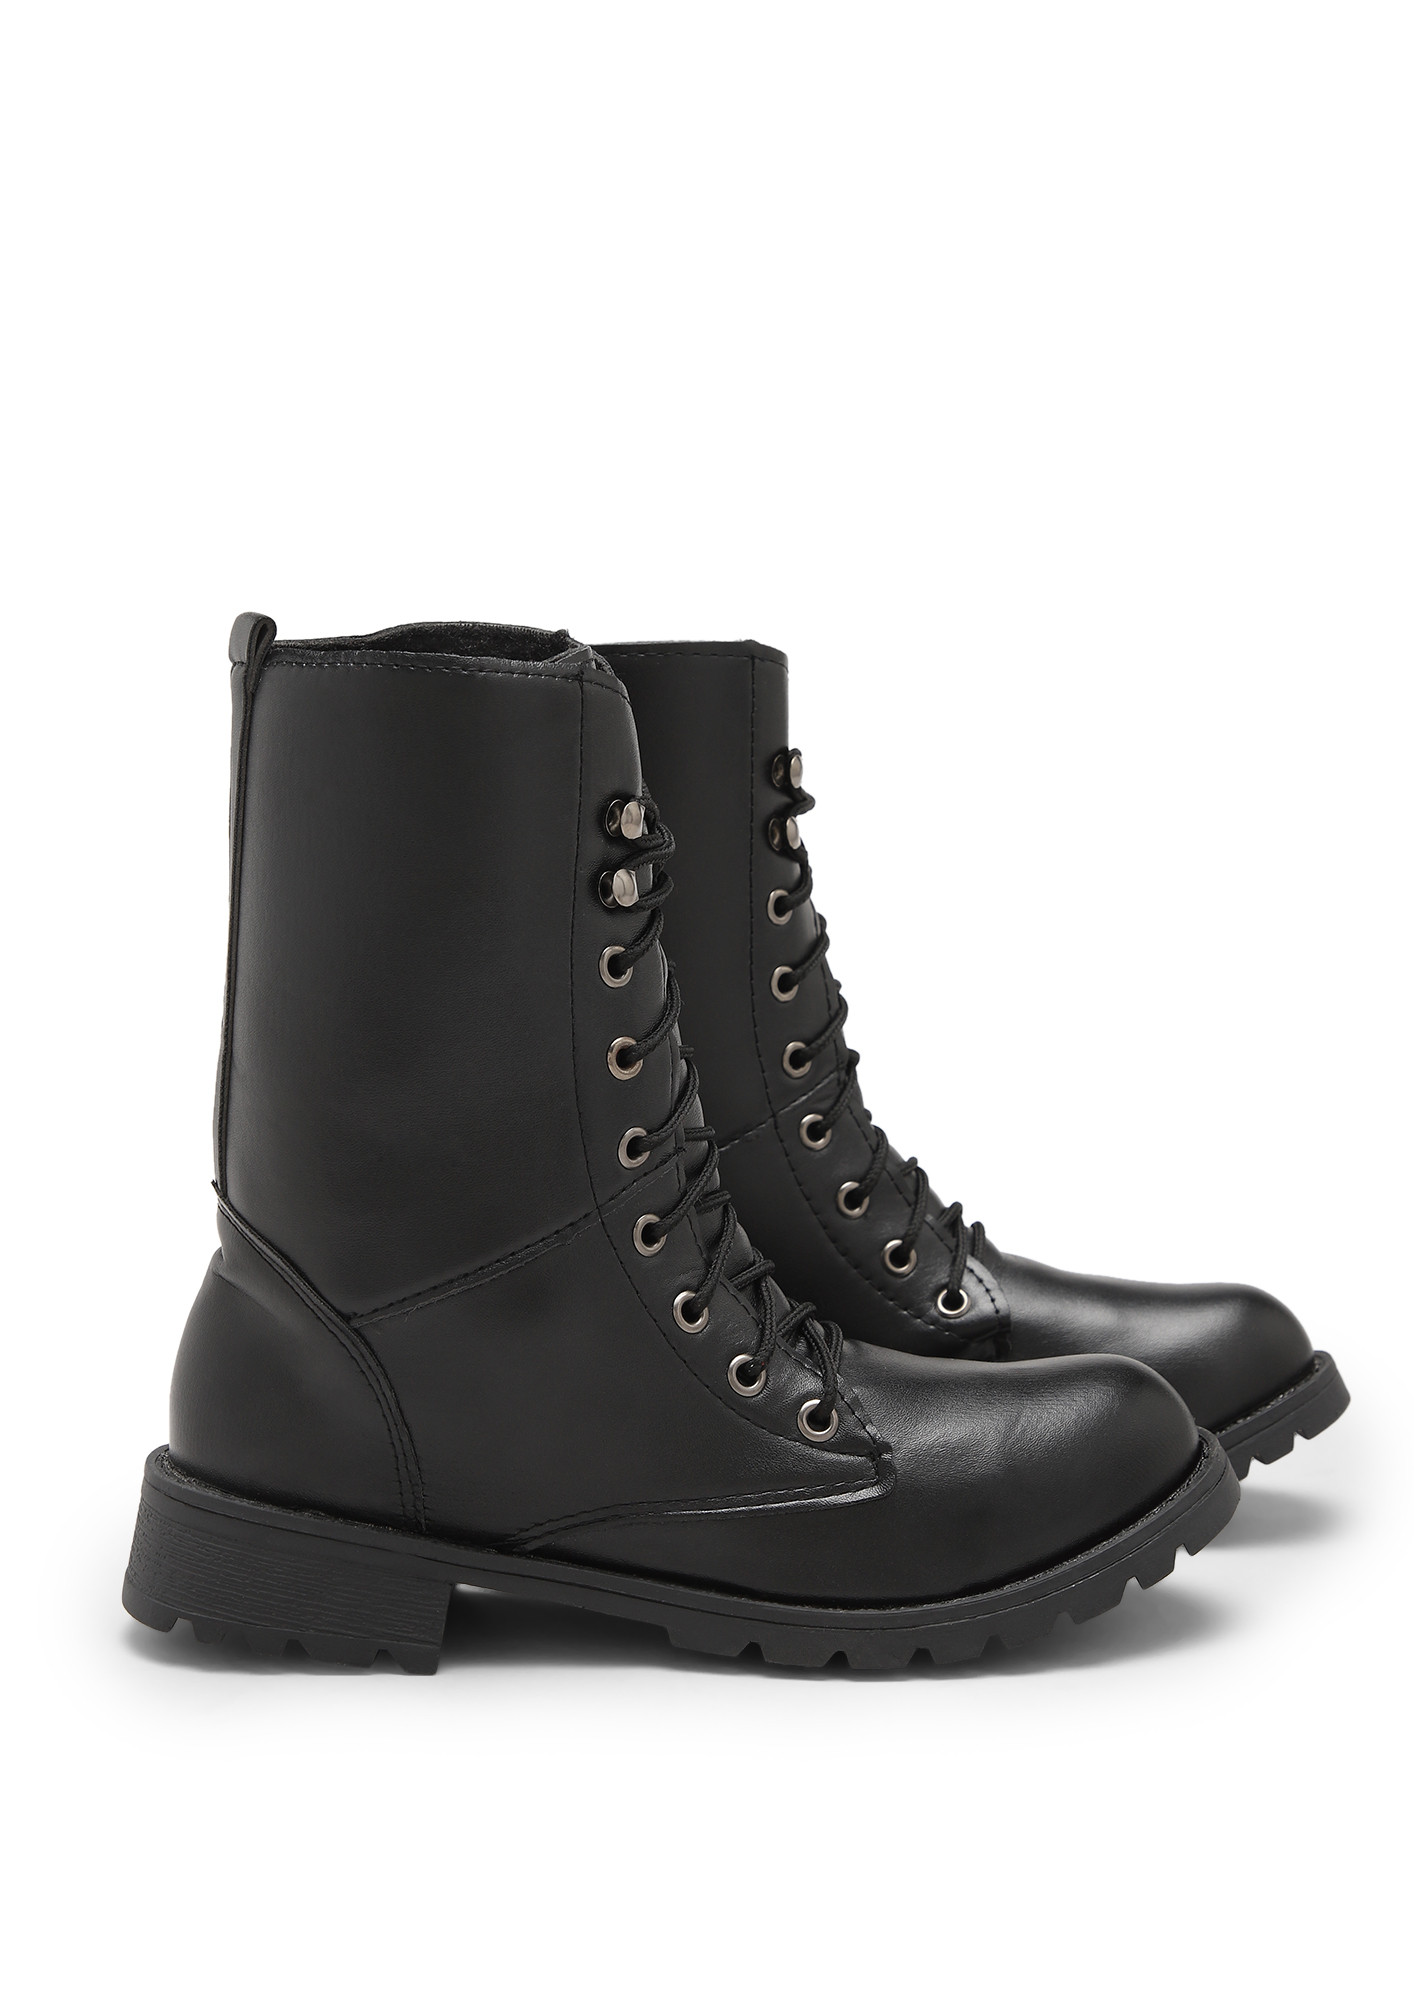 CALL OF THE TRAIL BLACK COMBAT BOOTS